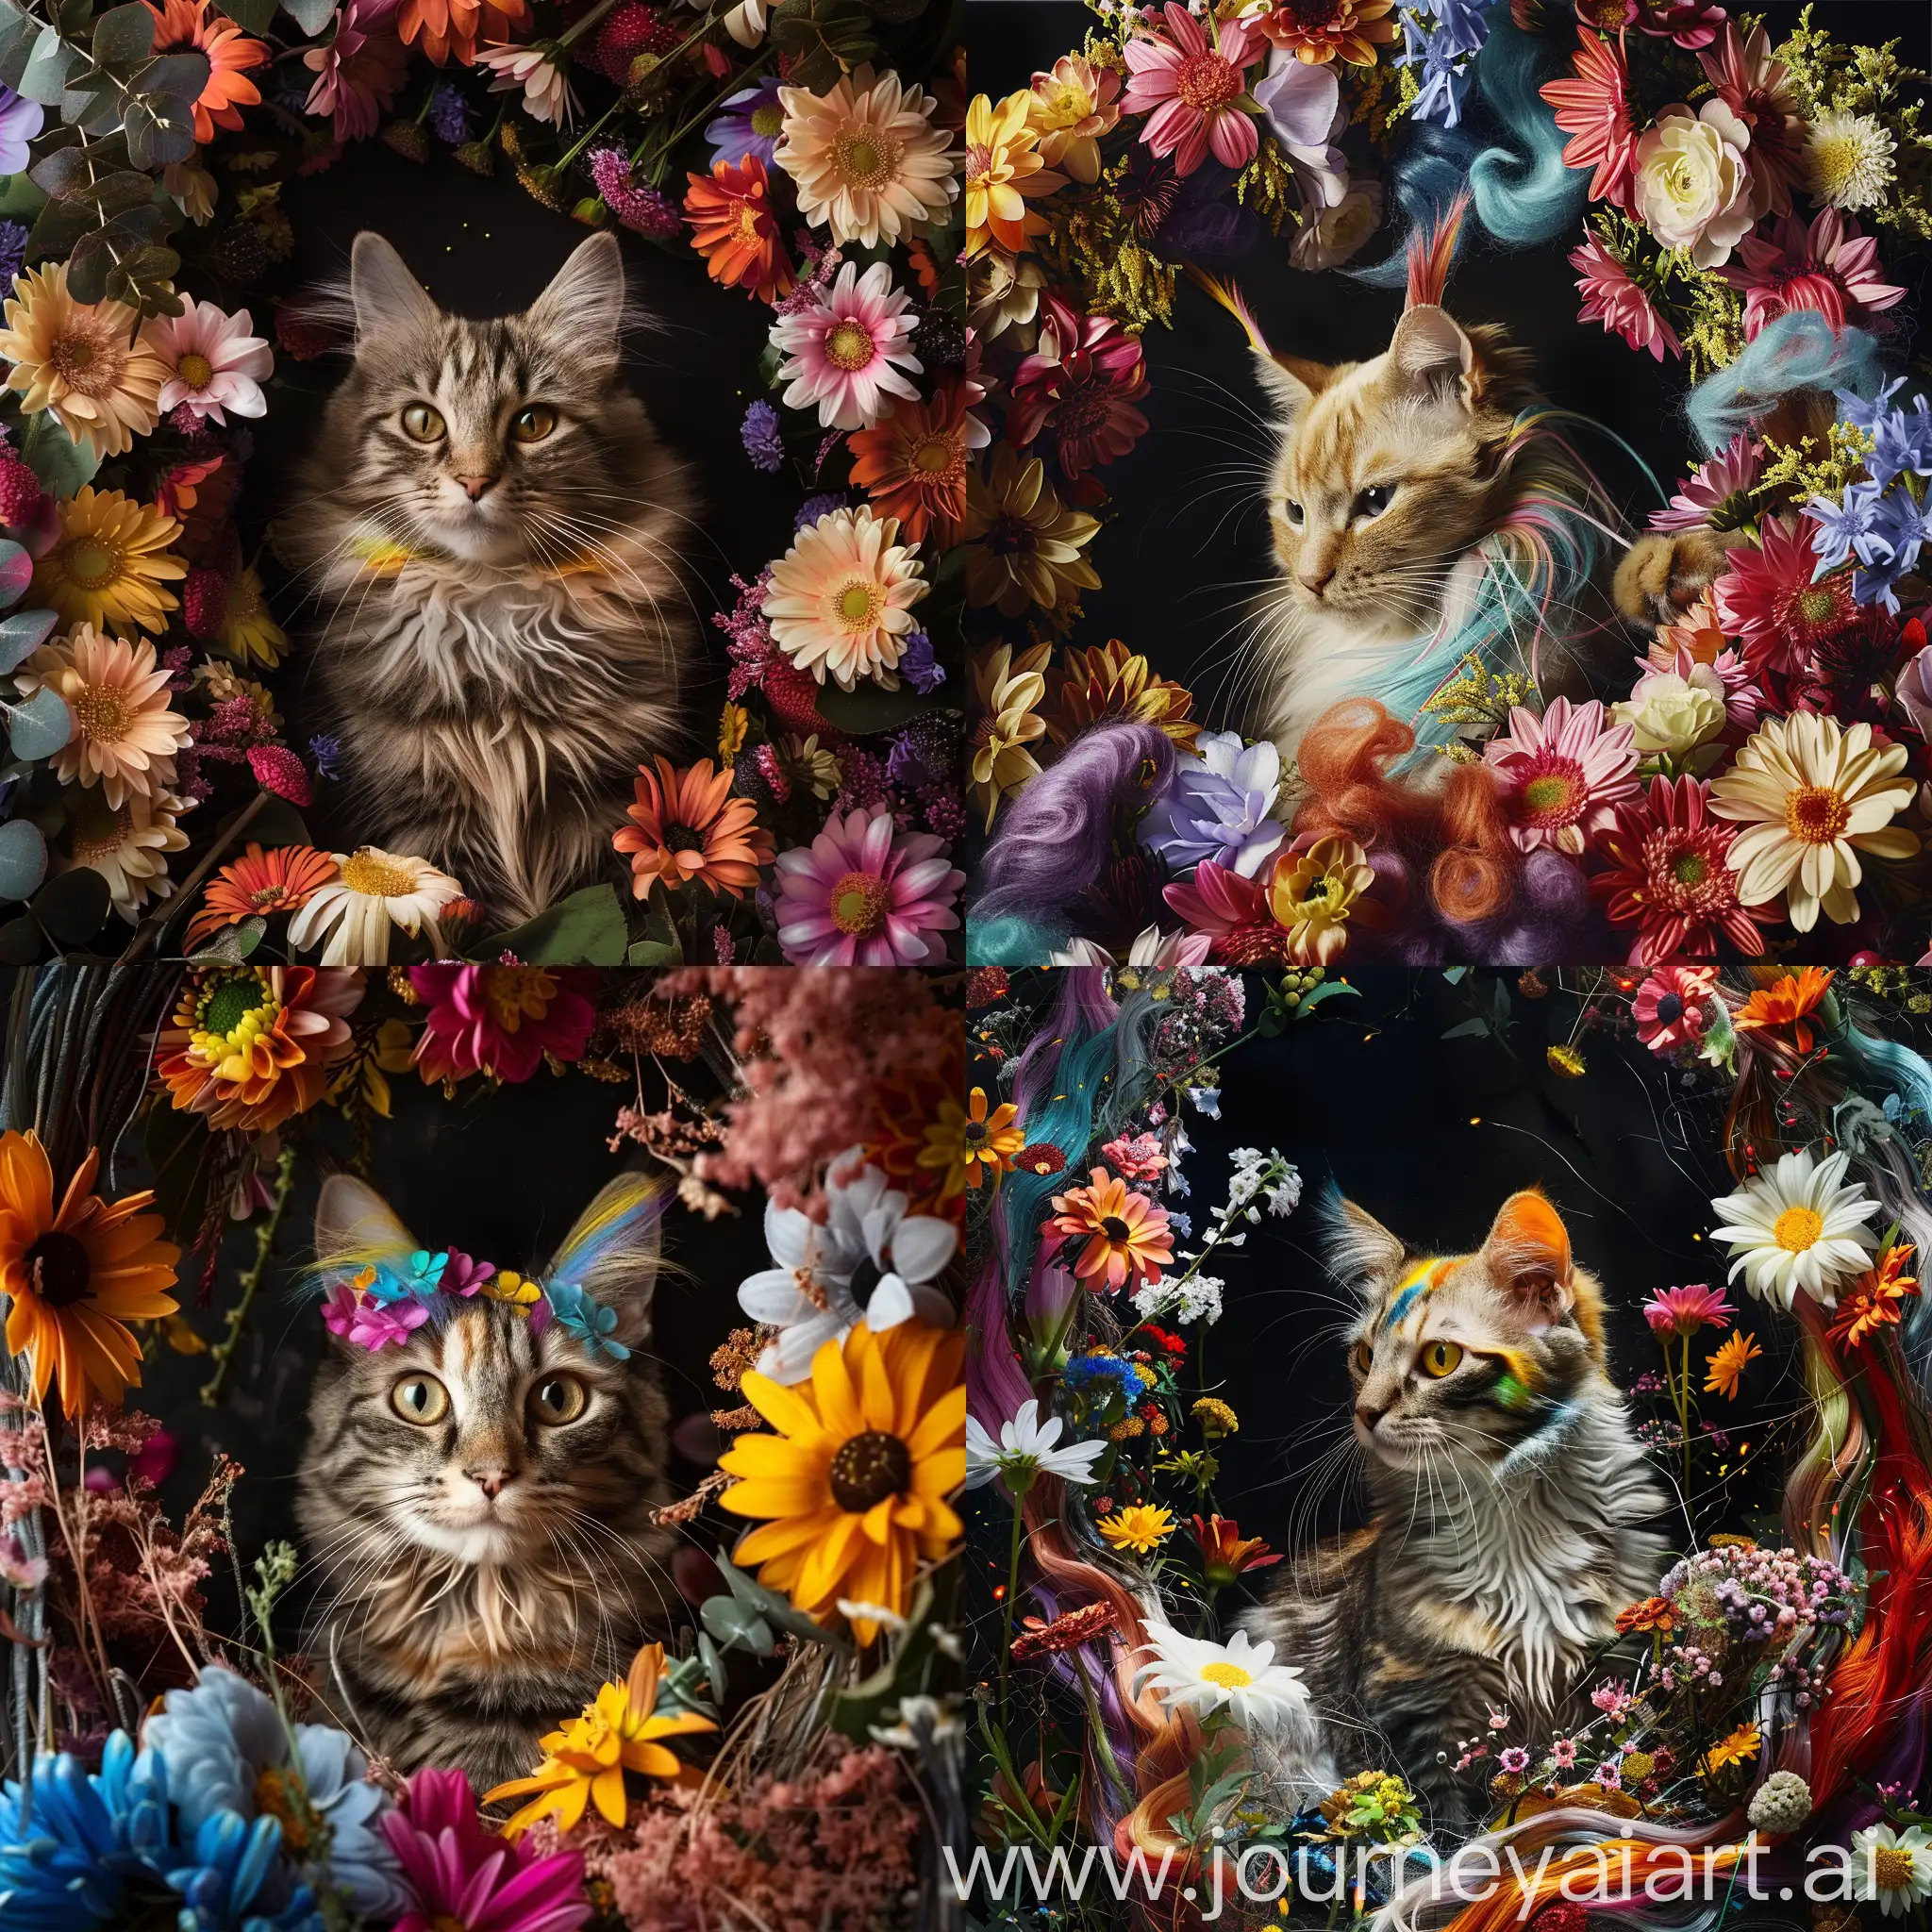 Floral-Fantasy-Whimsical-Cat-with-Colorful-Hair-on-a-Black-Background